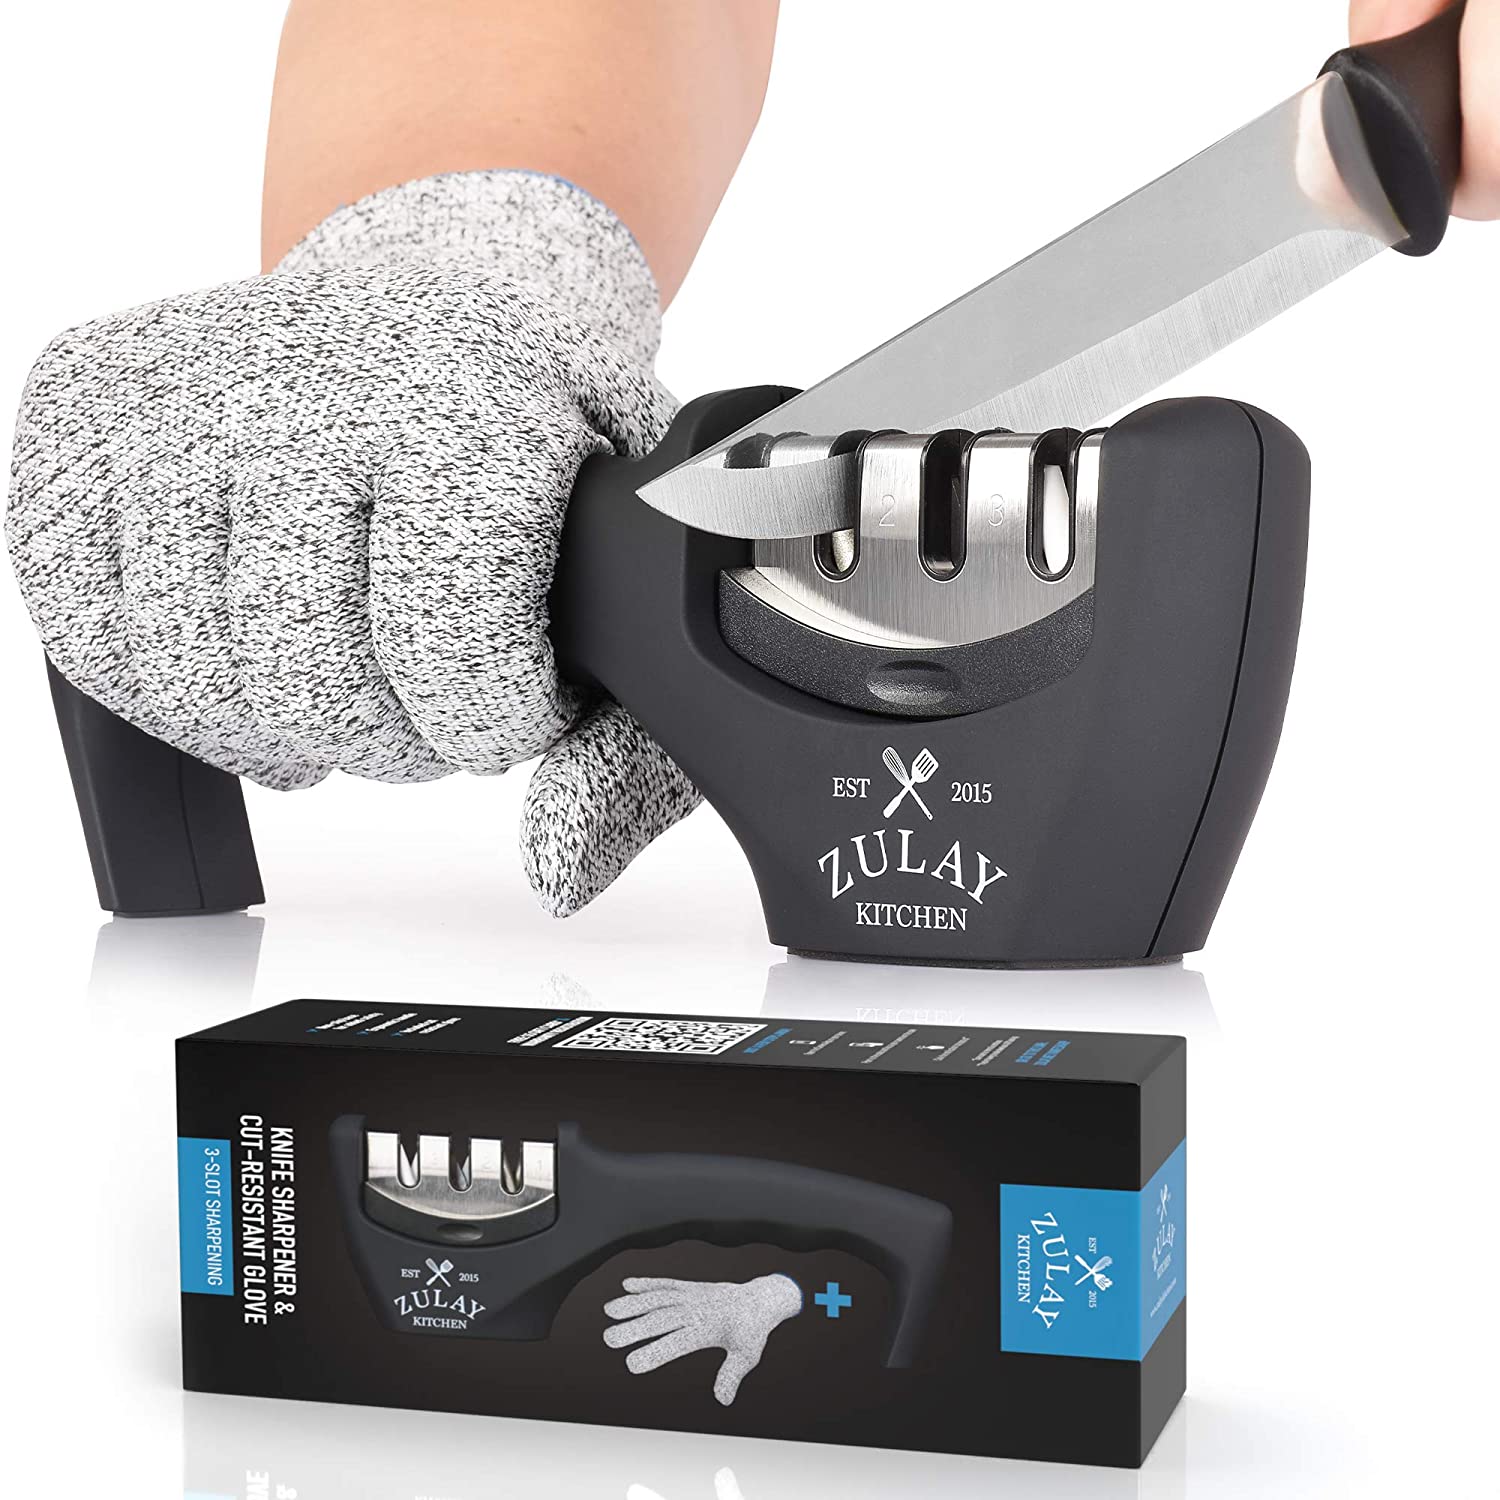 Poultry Shears Online  Zulay Kitchen - Save Big Today